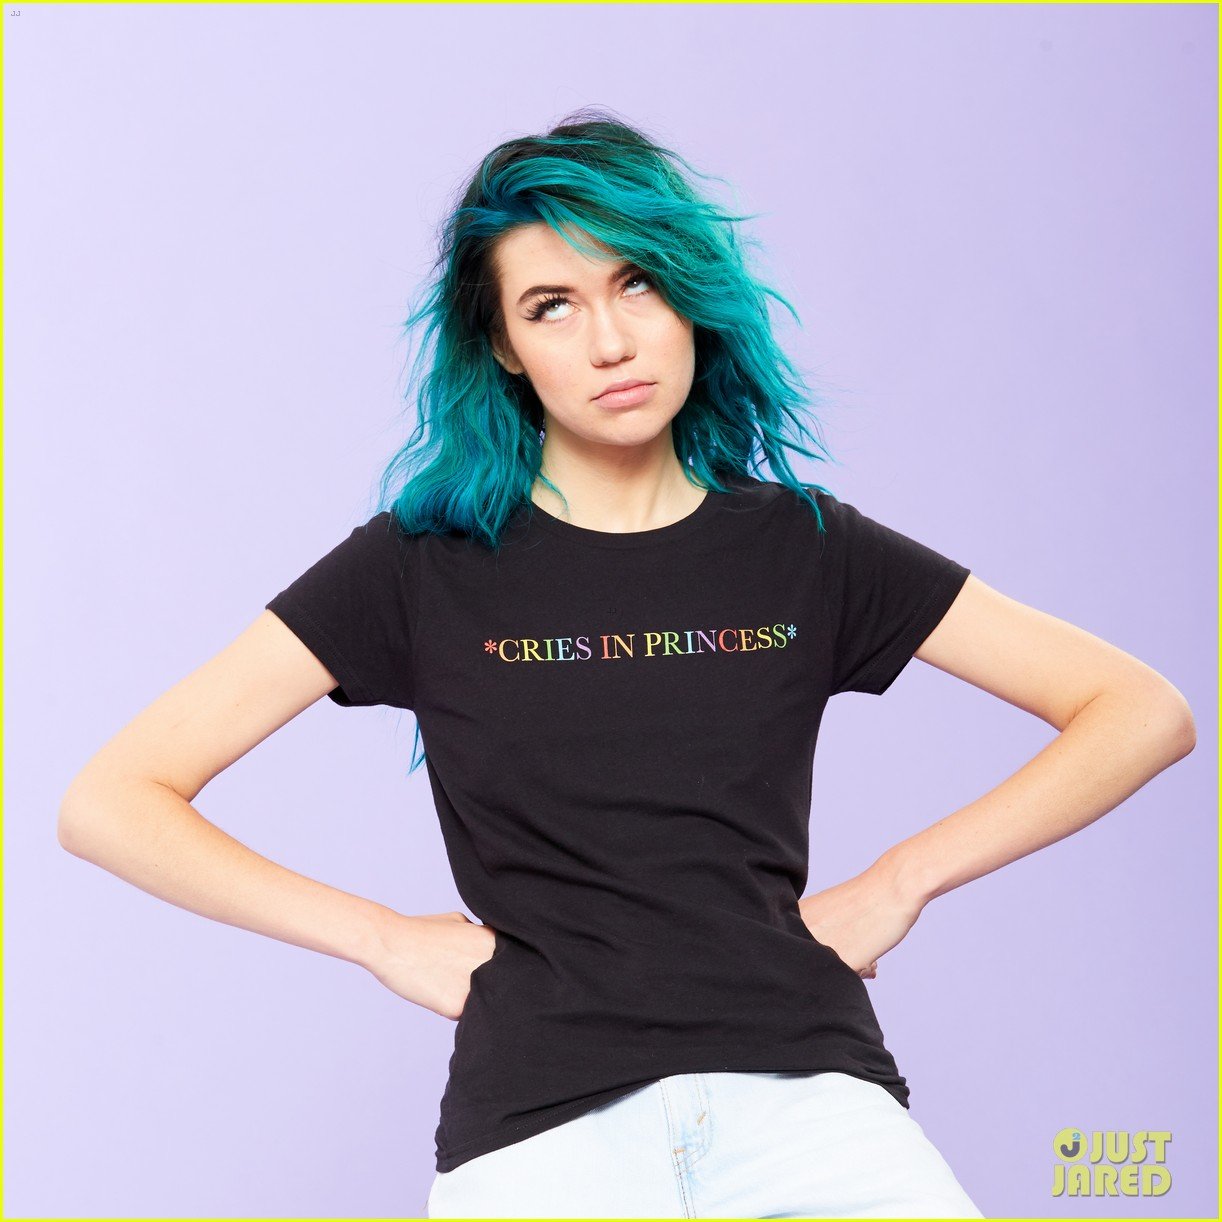 jessie paege has her own hot topic web store dream come true 01